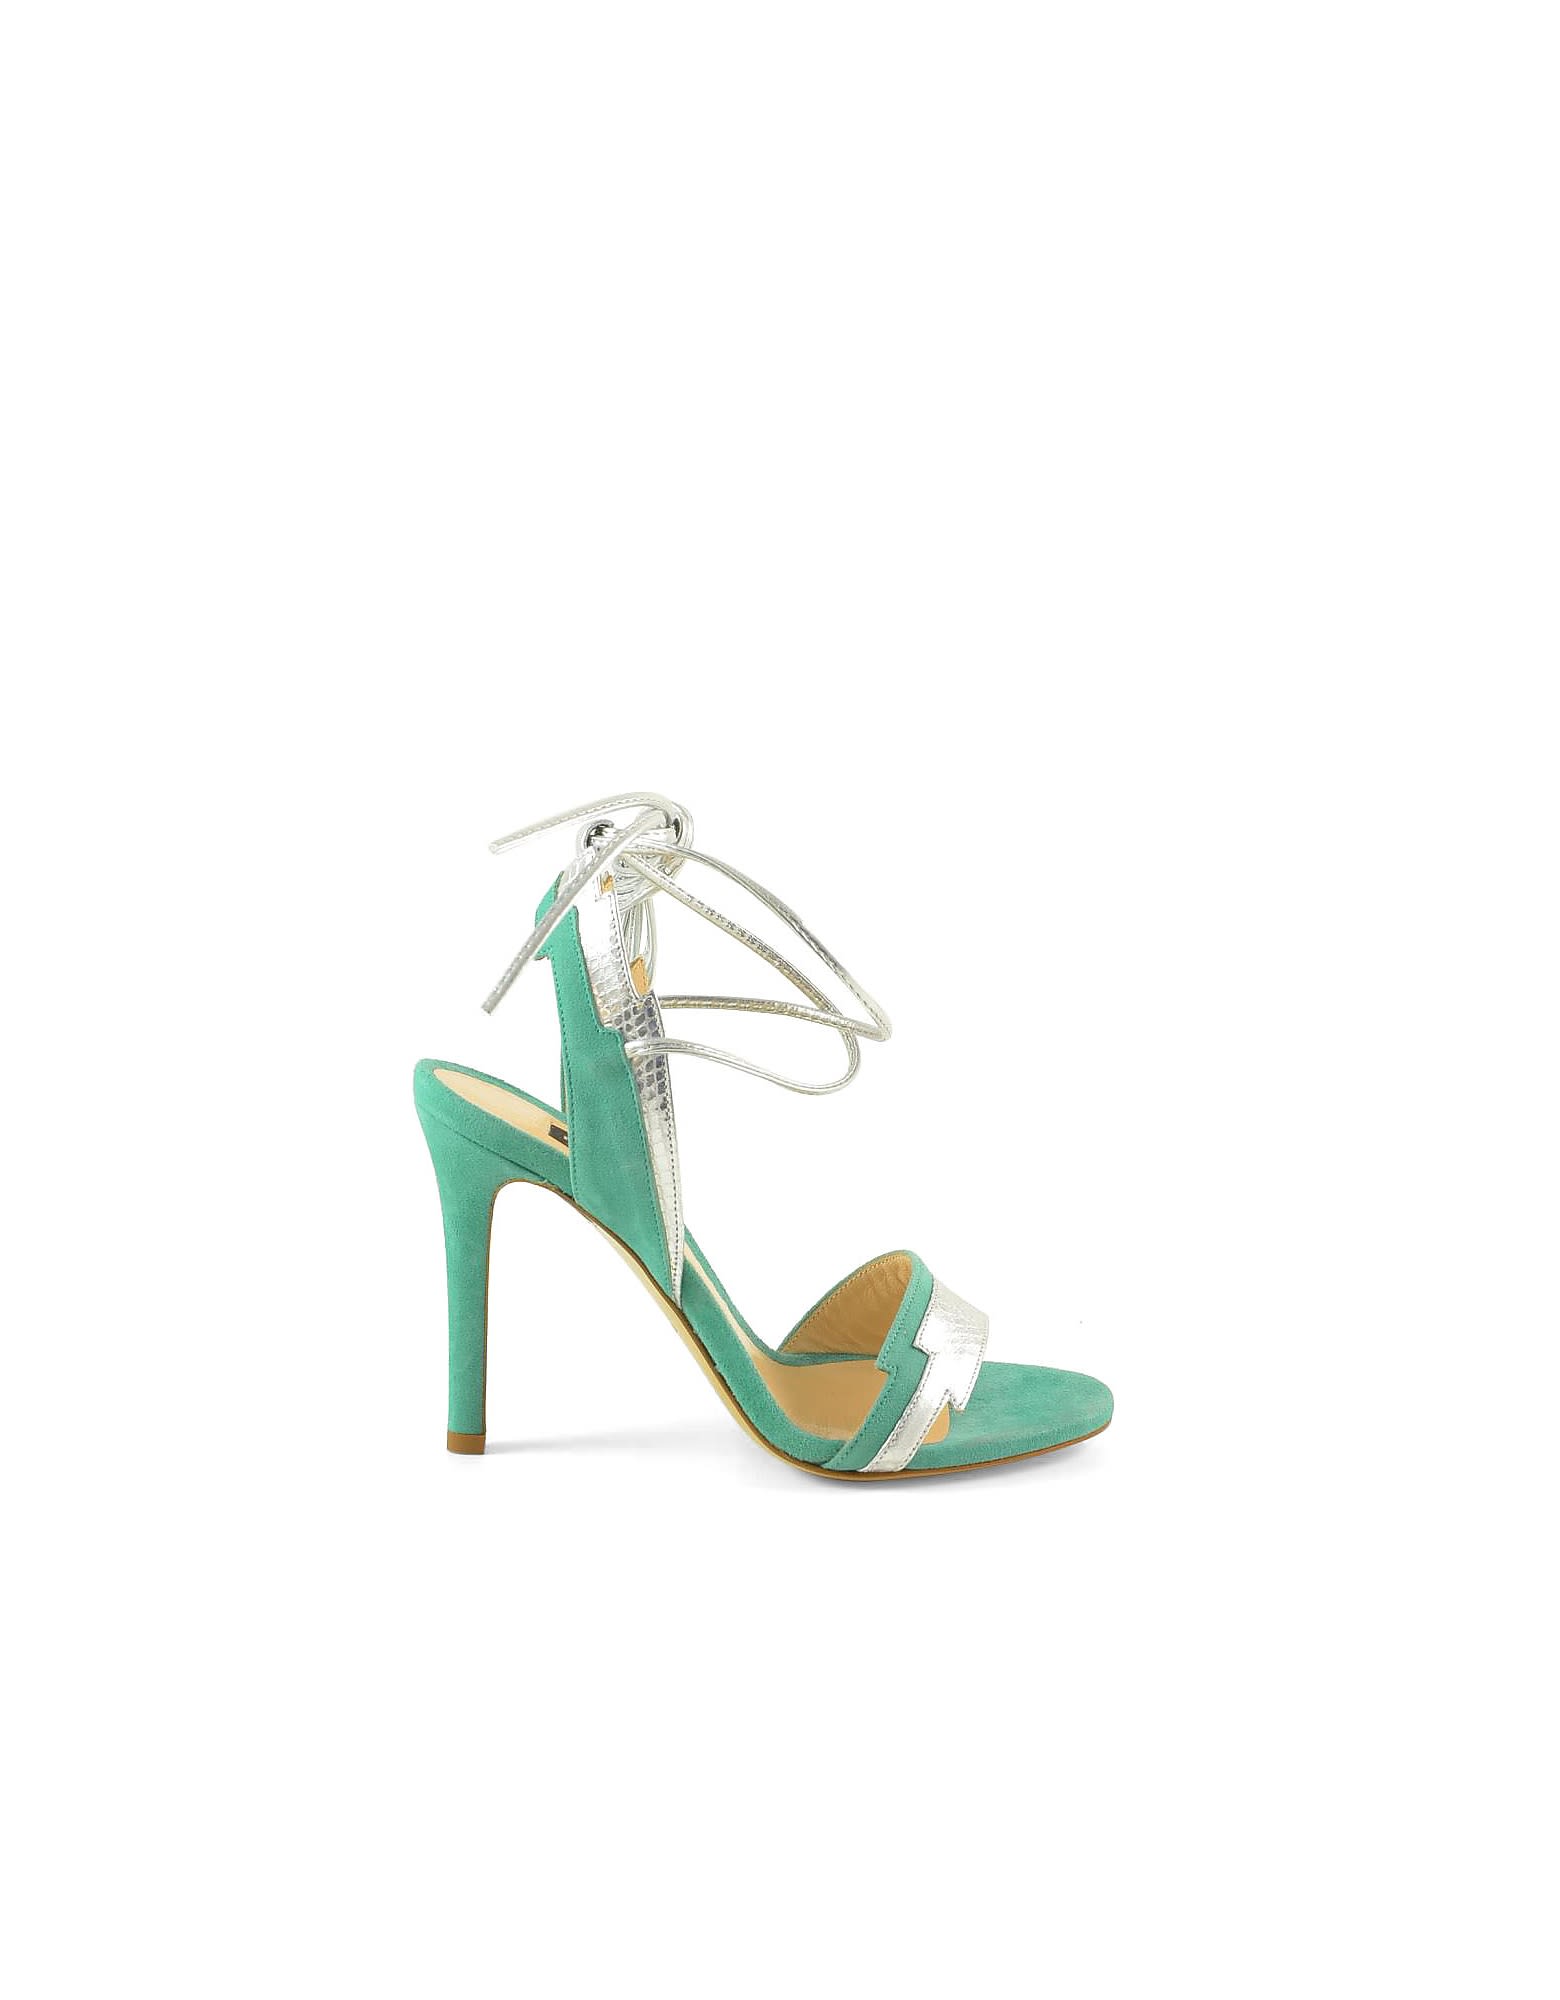 Pinko Aqua Green Suede And Silver Printed Leather High Heel Sandals